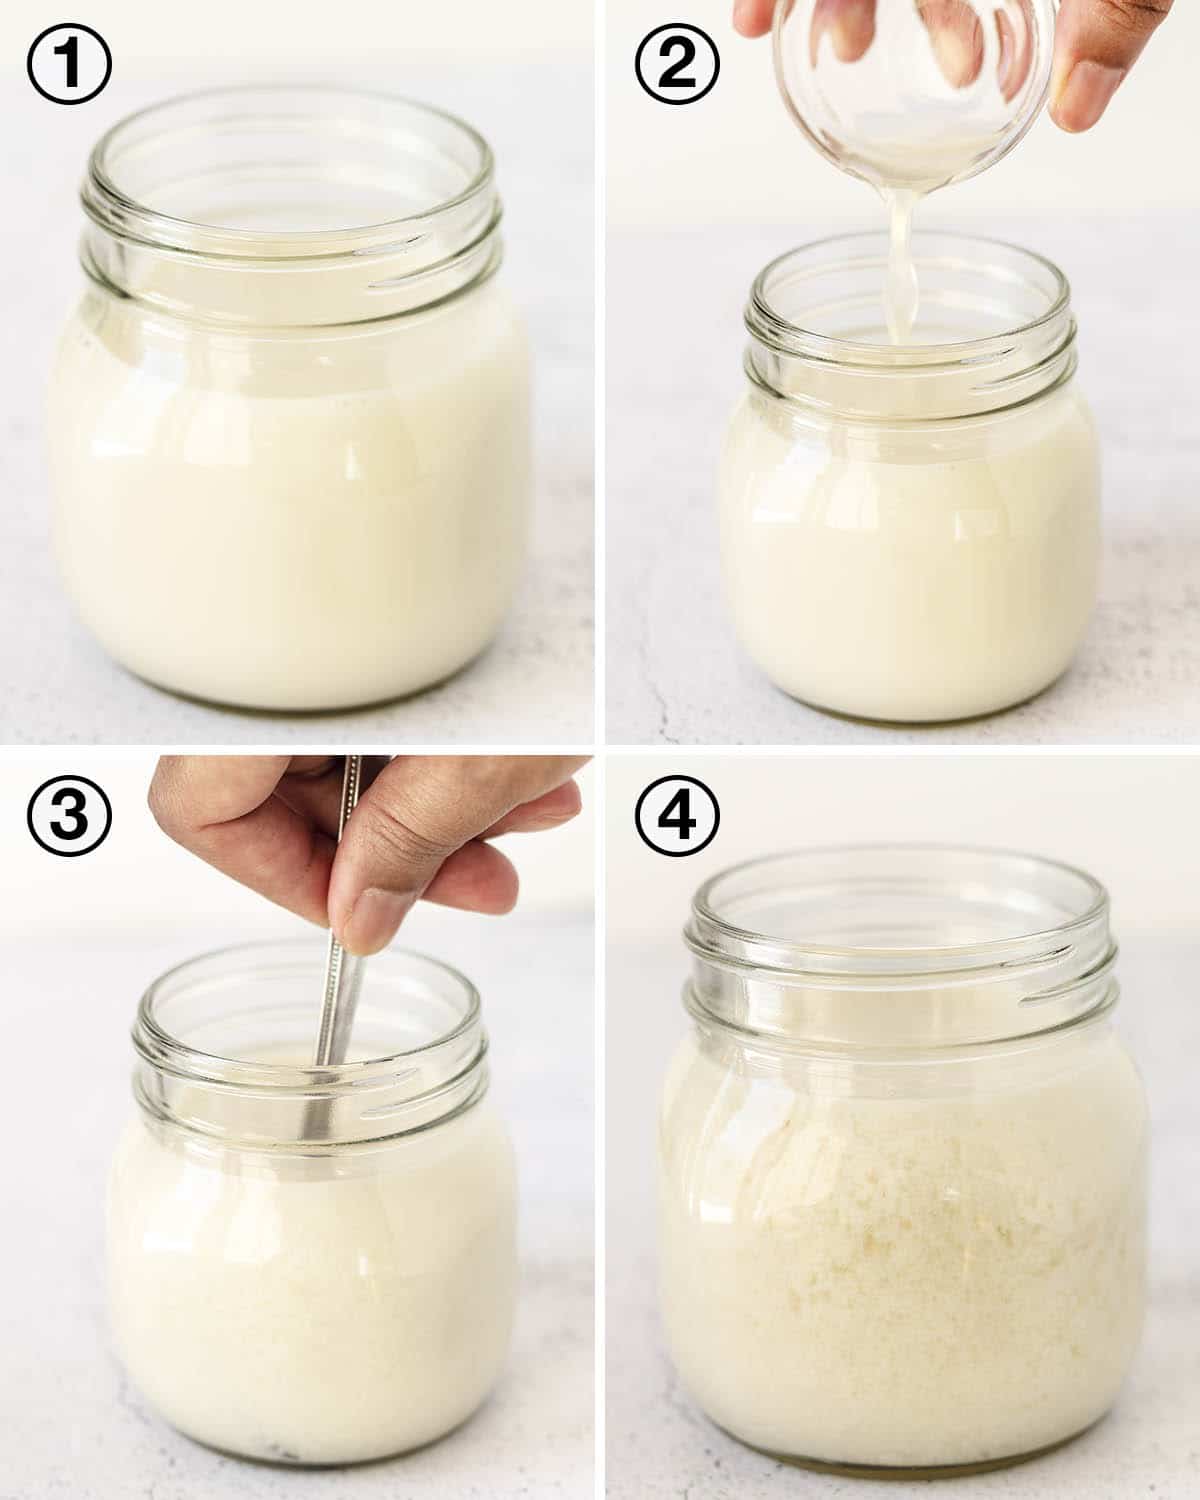 A collage of four images showing the sequence of steps needed to make dairy-free buttermilk.